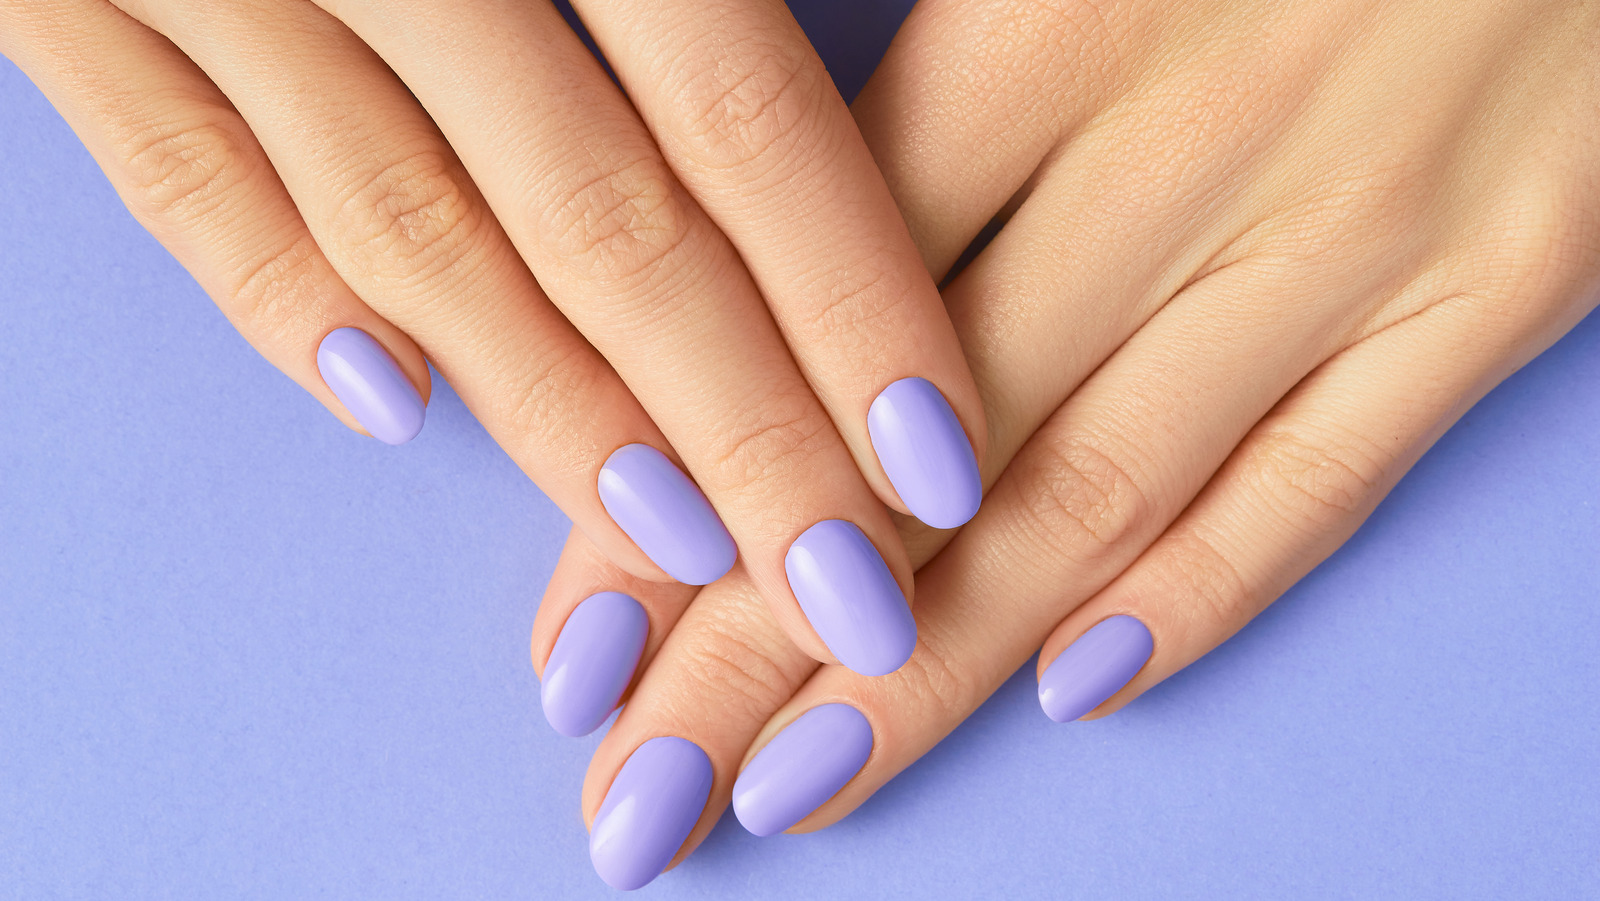 What are the pros and cons of different nail shapes? - Quora